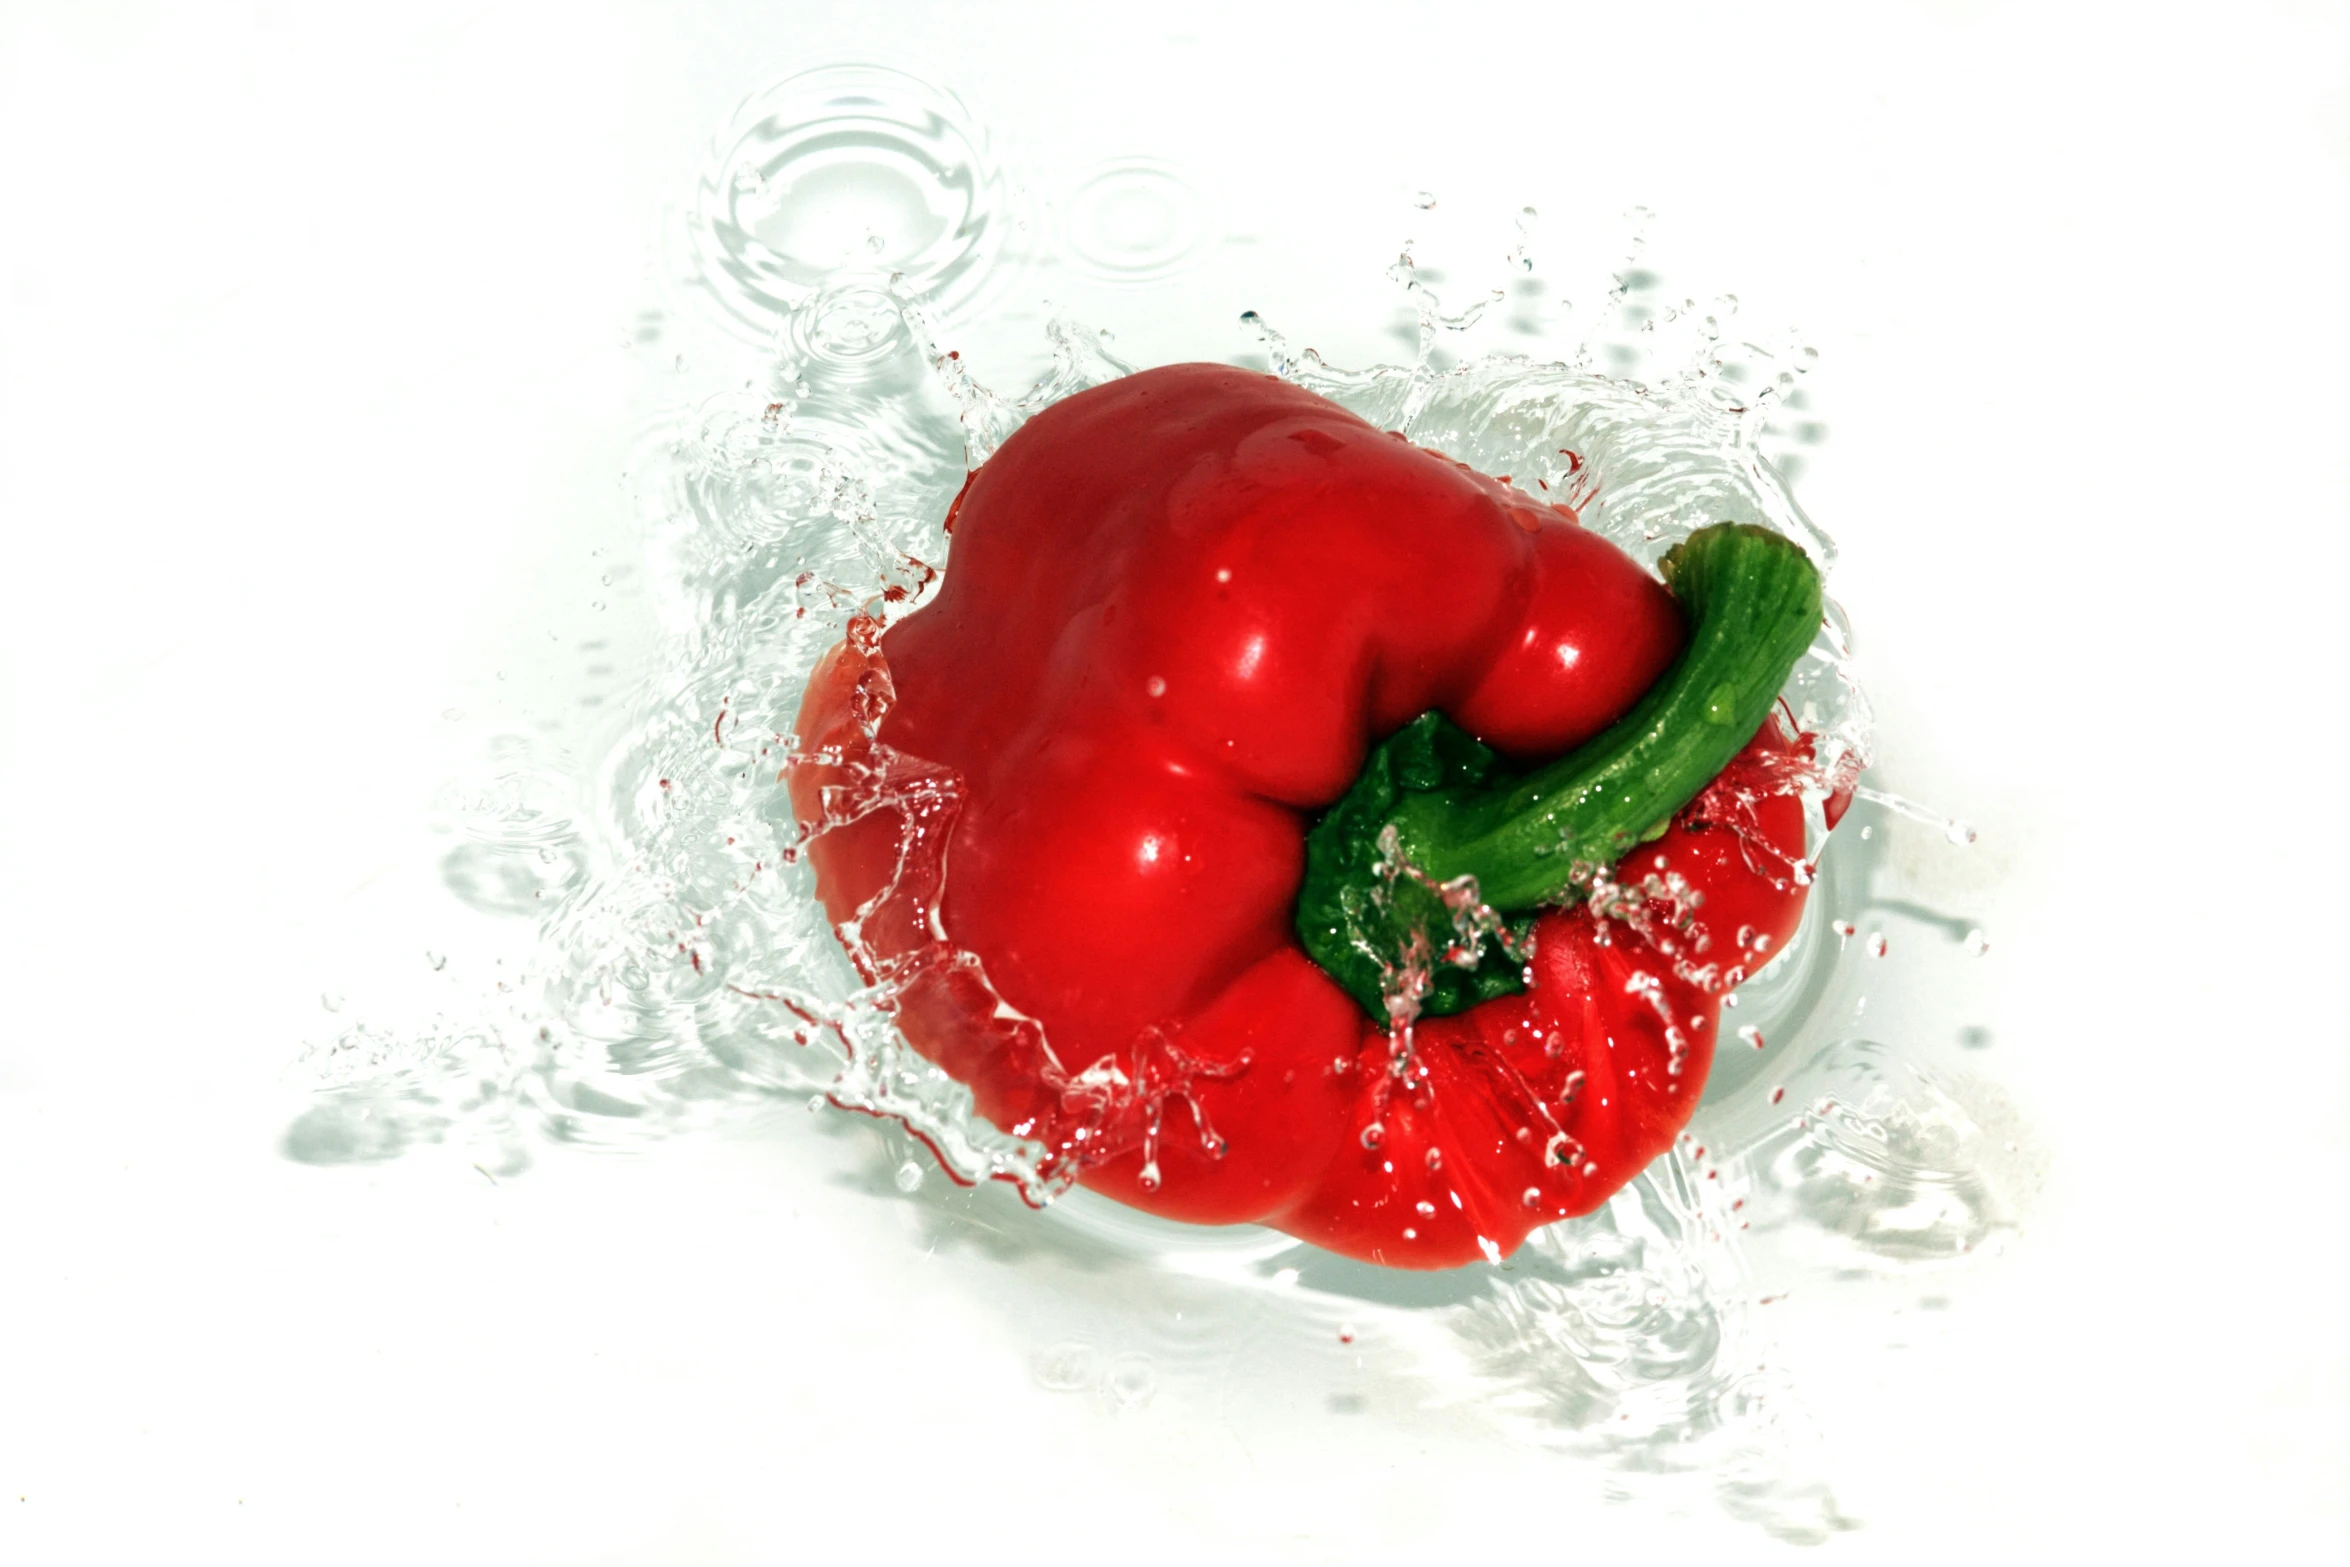 a red bell pepper splashing into water